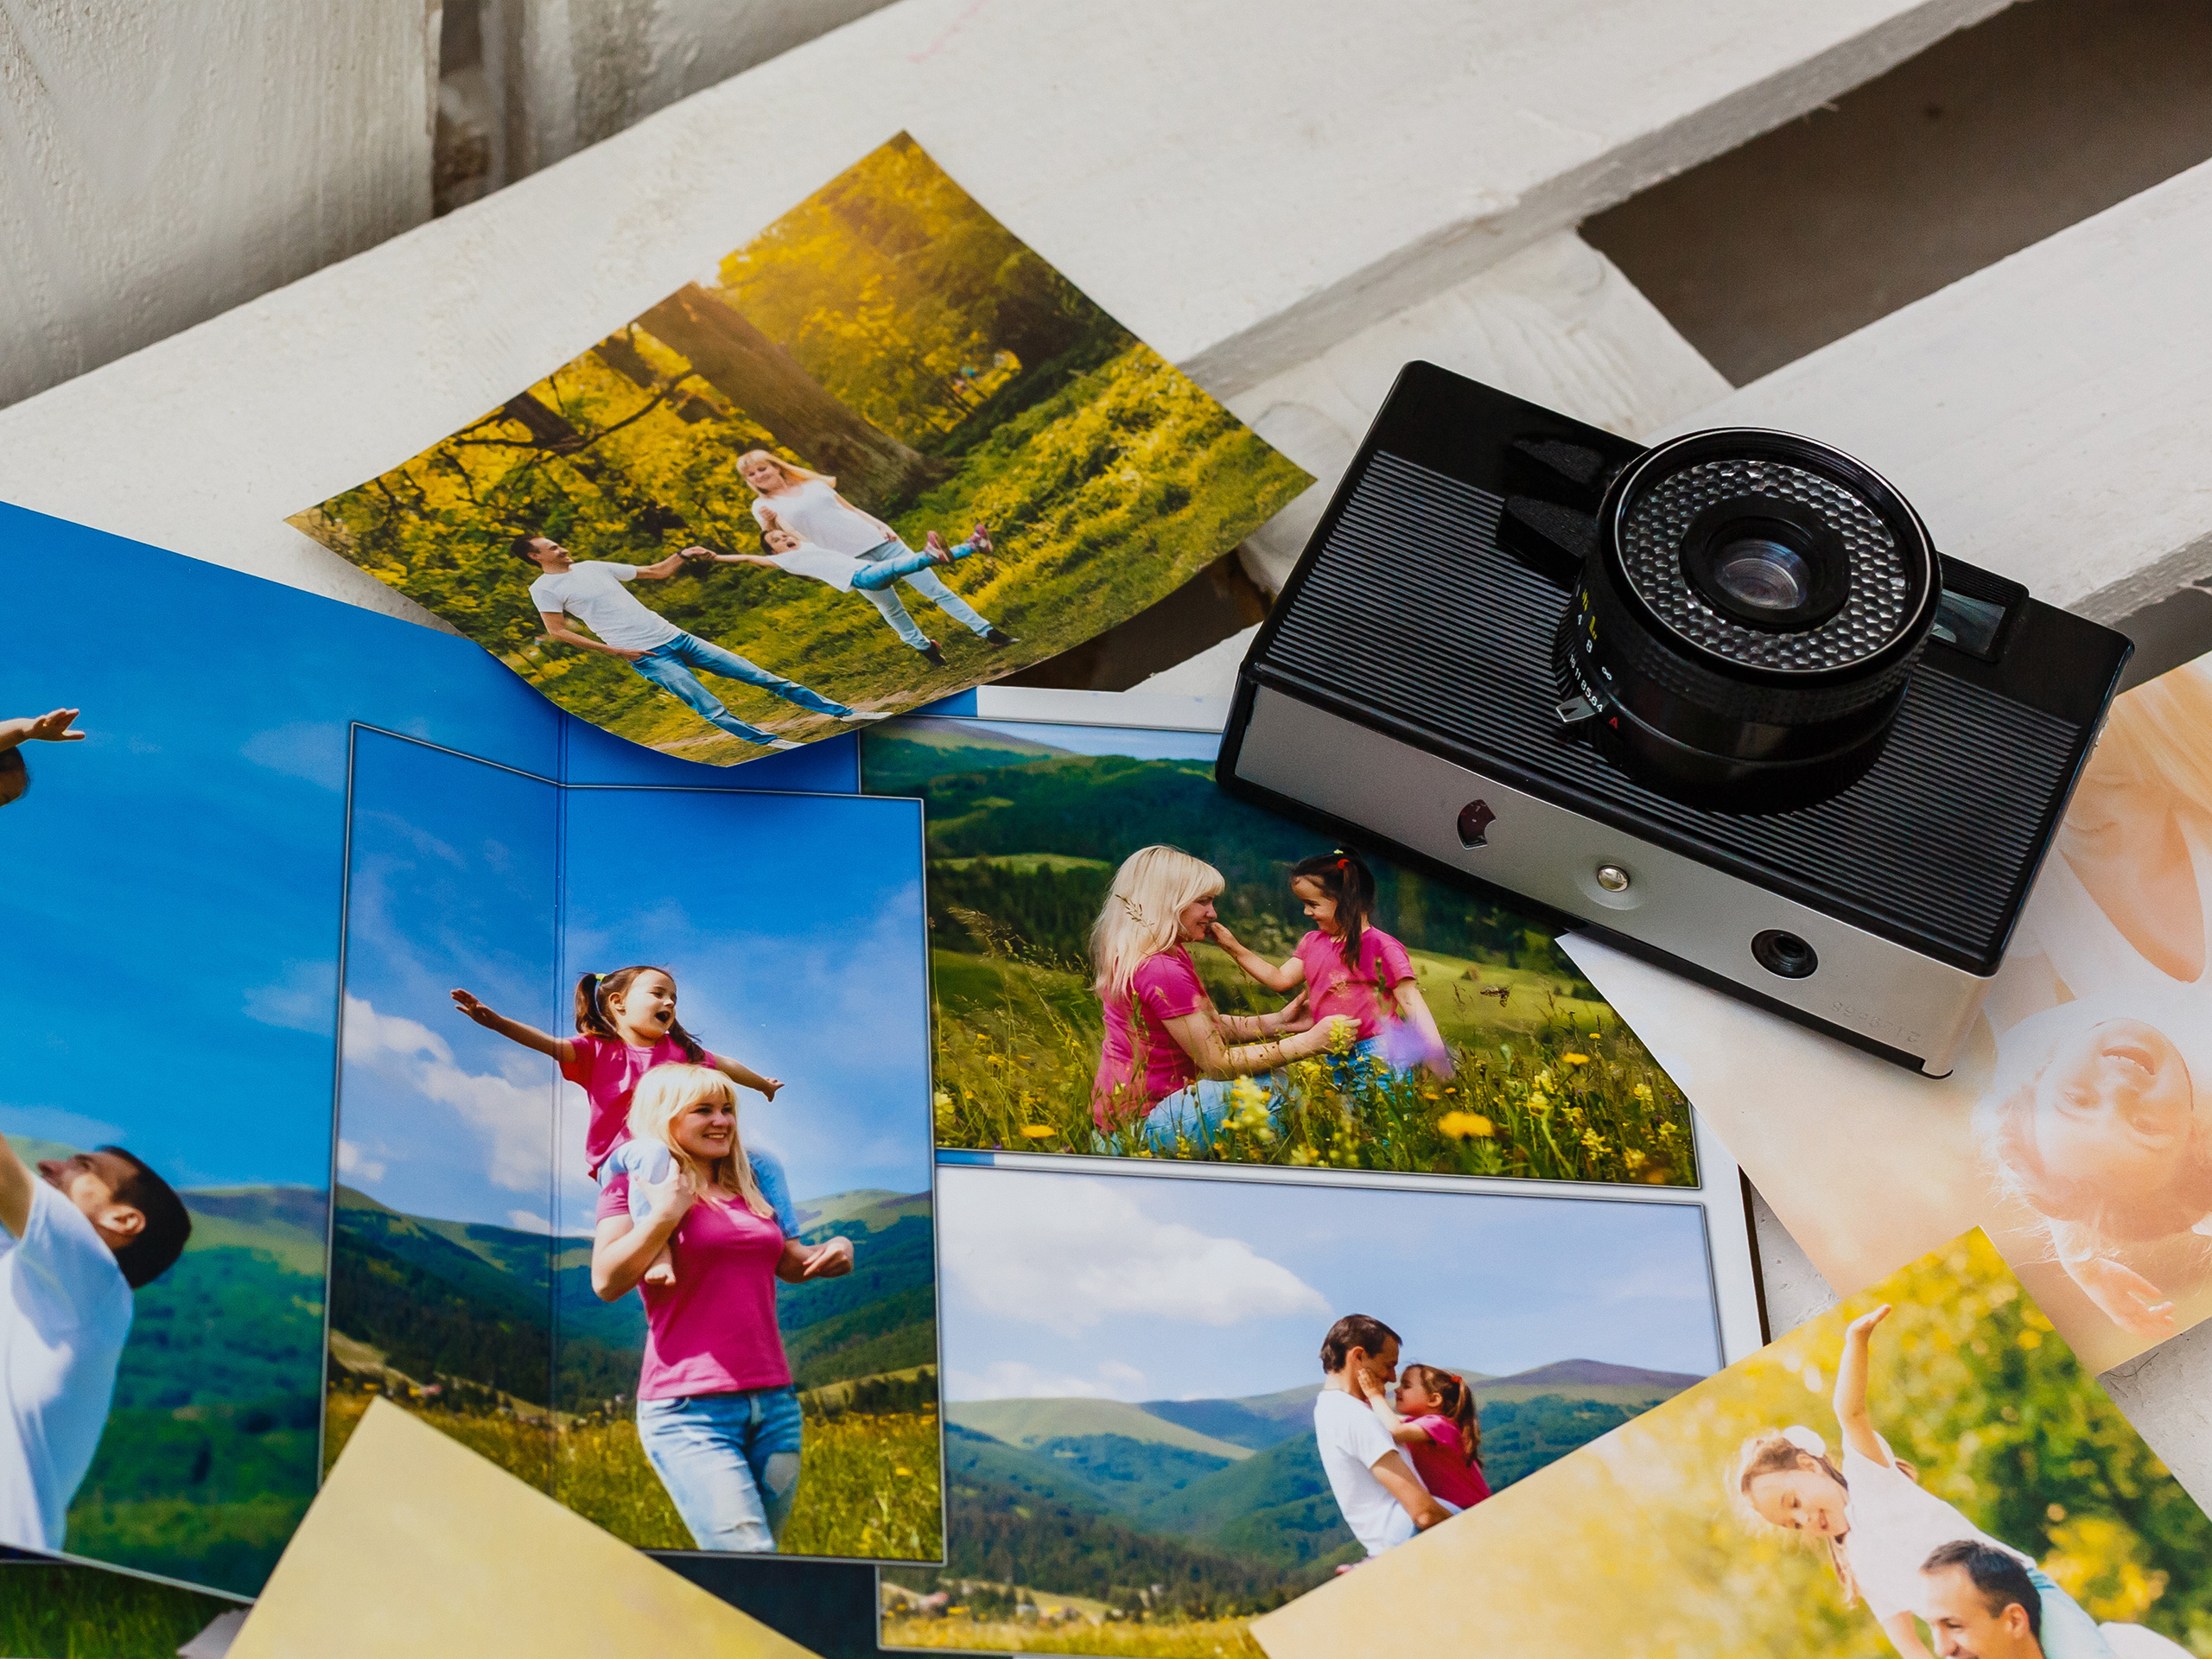 Photo album with photos of travel and vintage old camera on a background ; Courtesy of Andrew Angelov/Shutterstock